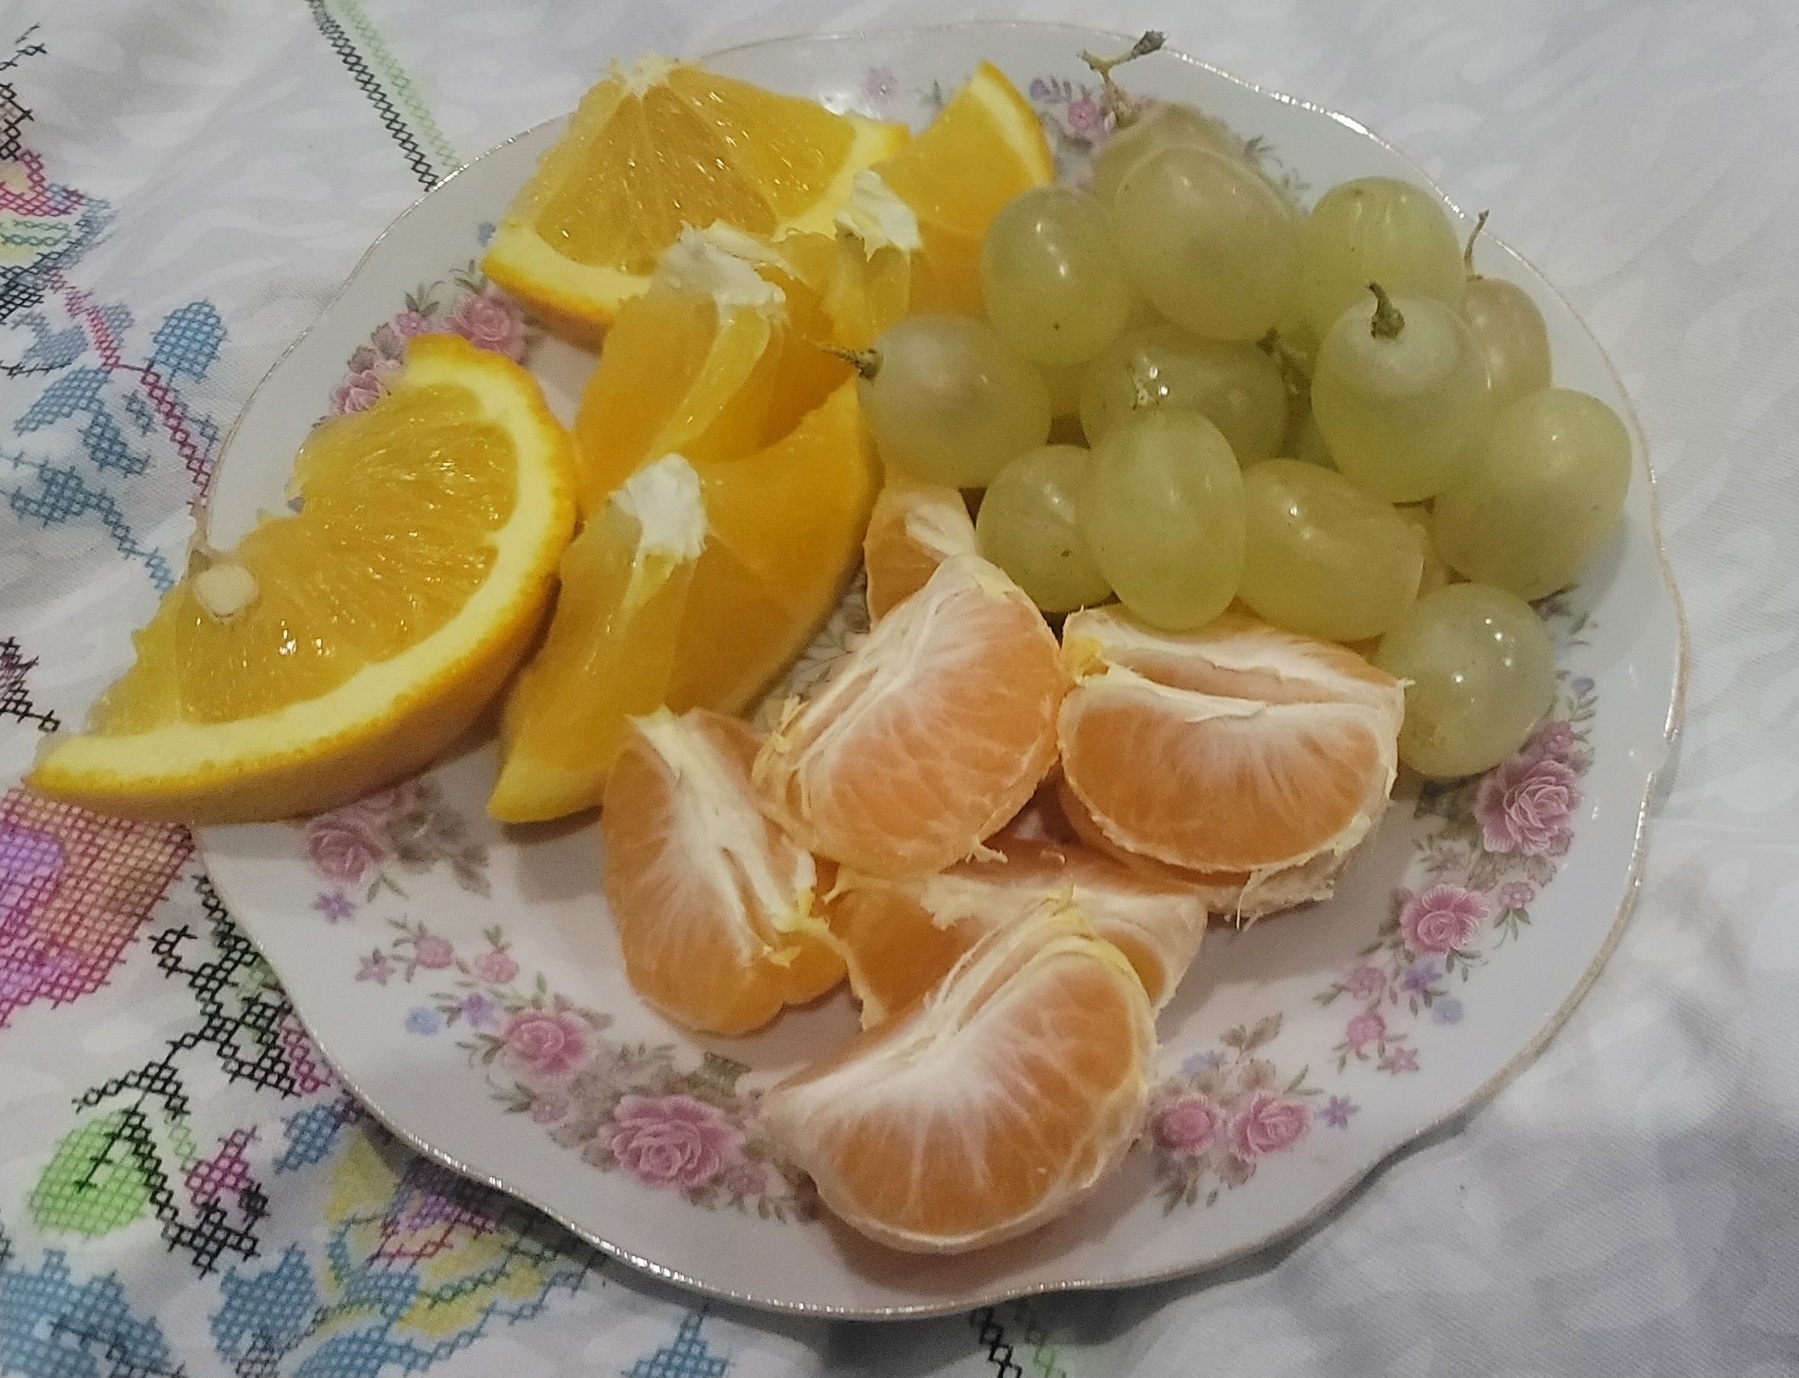 plate with orange slices, tangerine slices and green grapes